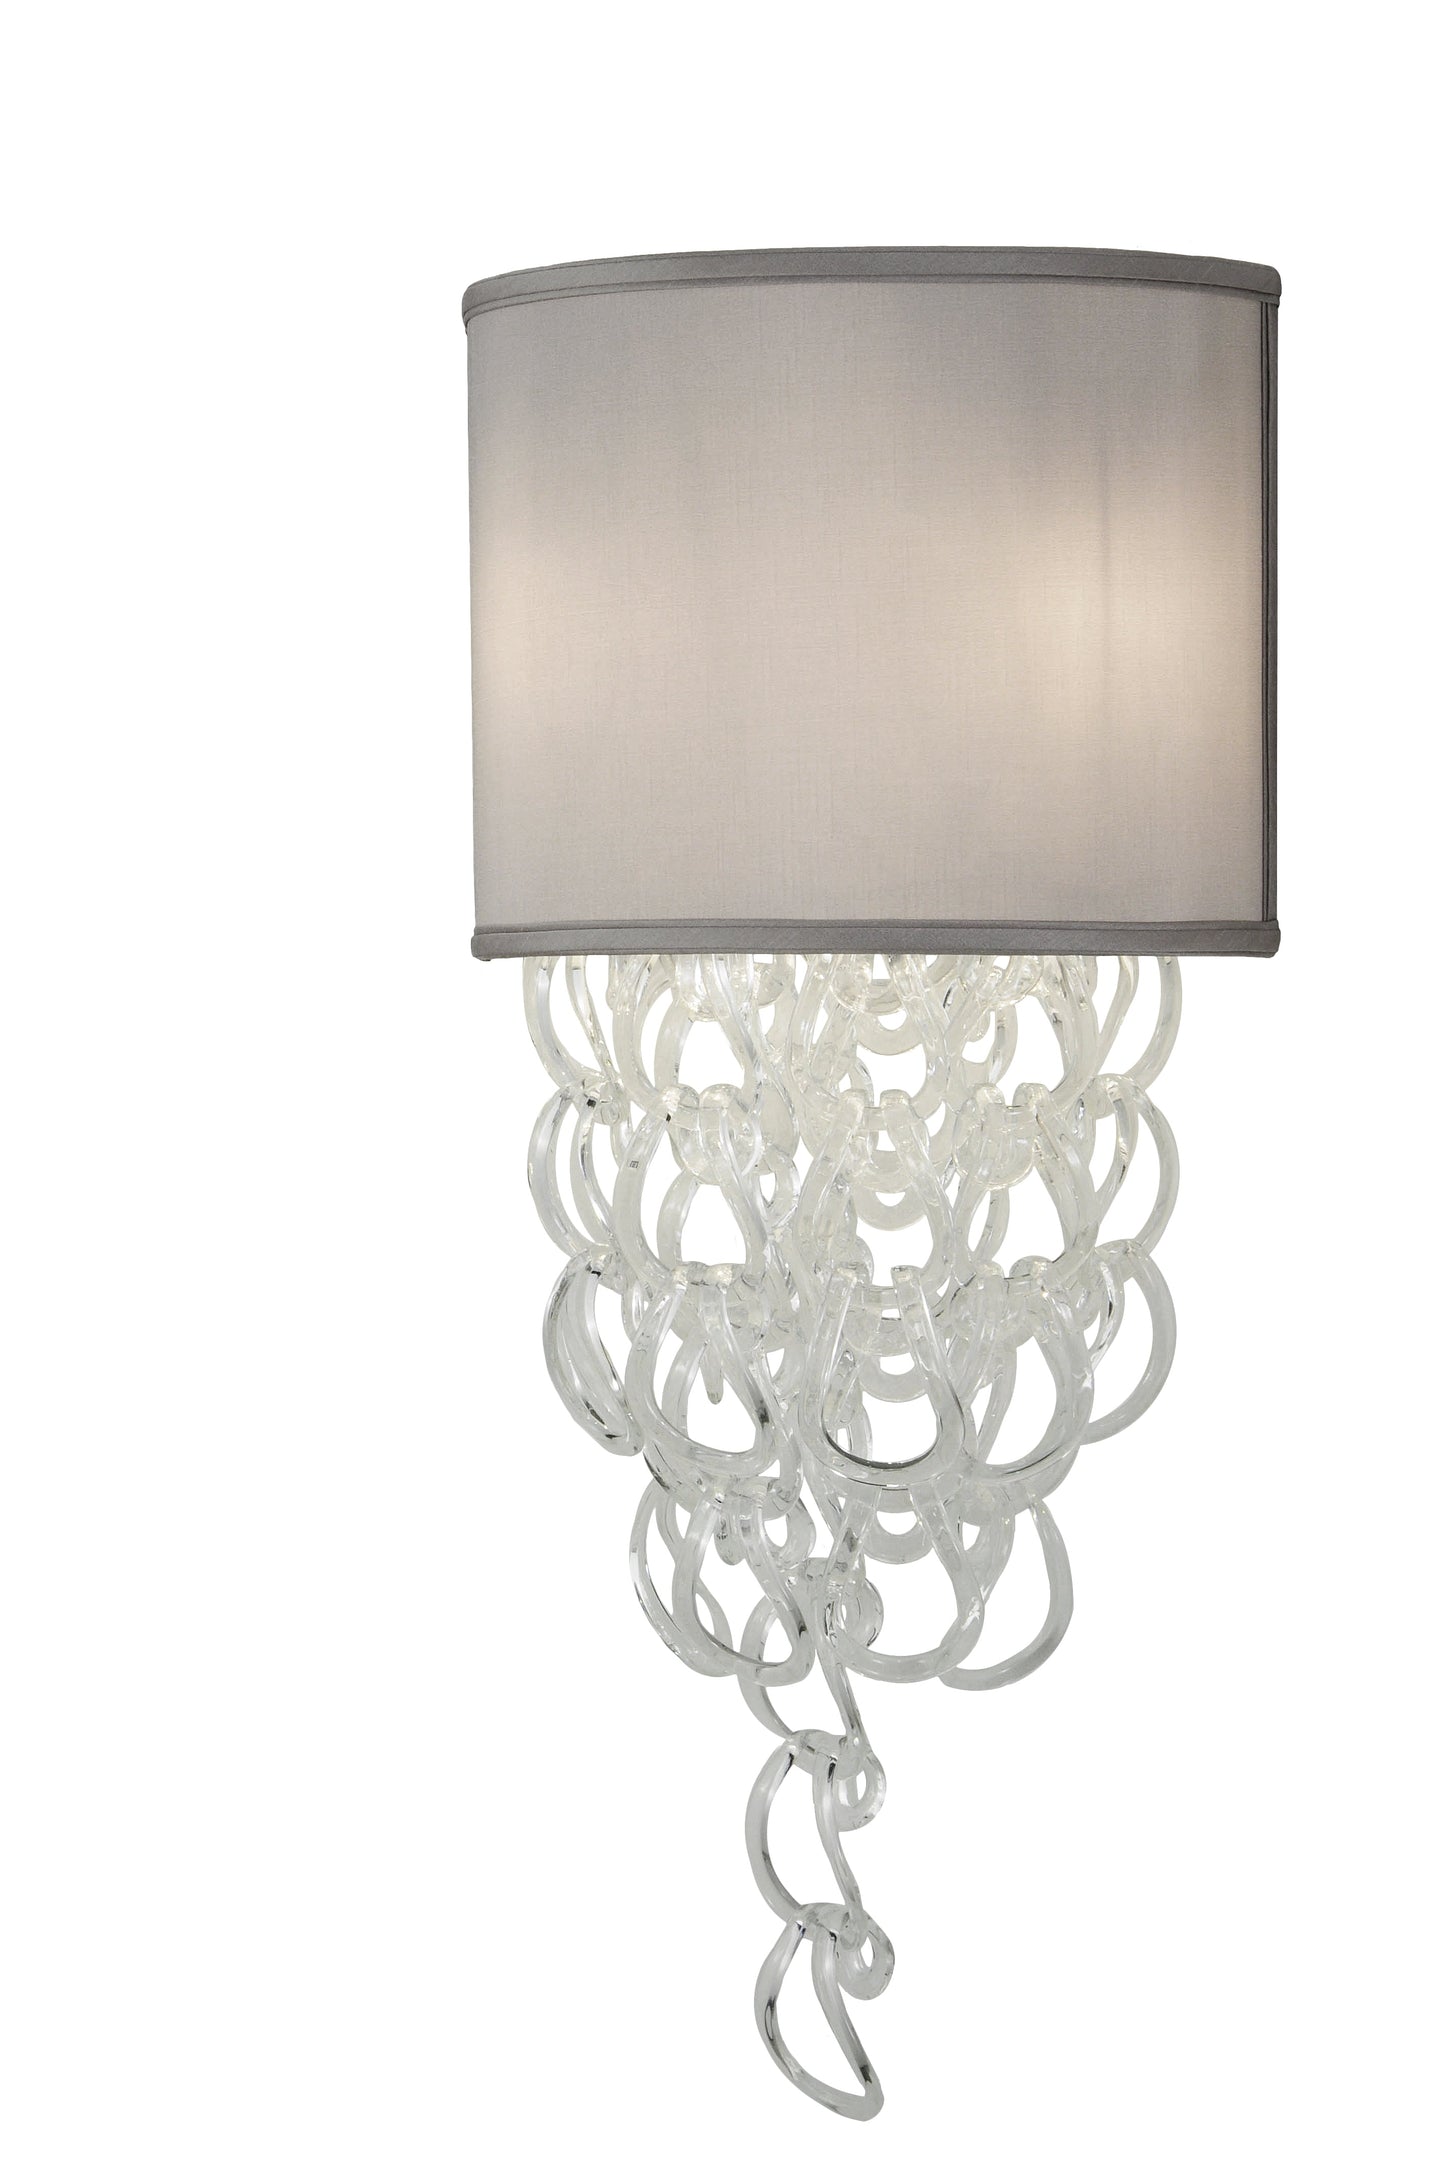 15" Lucy Wall Sconce by 2nd Ave Lighting